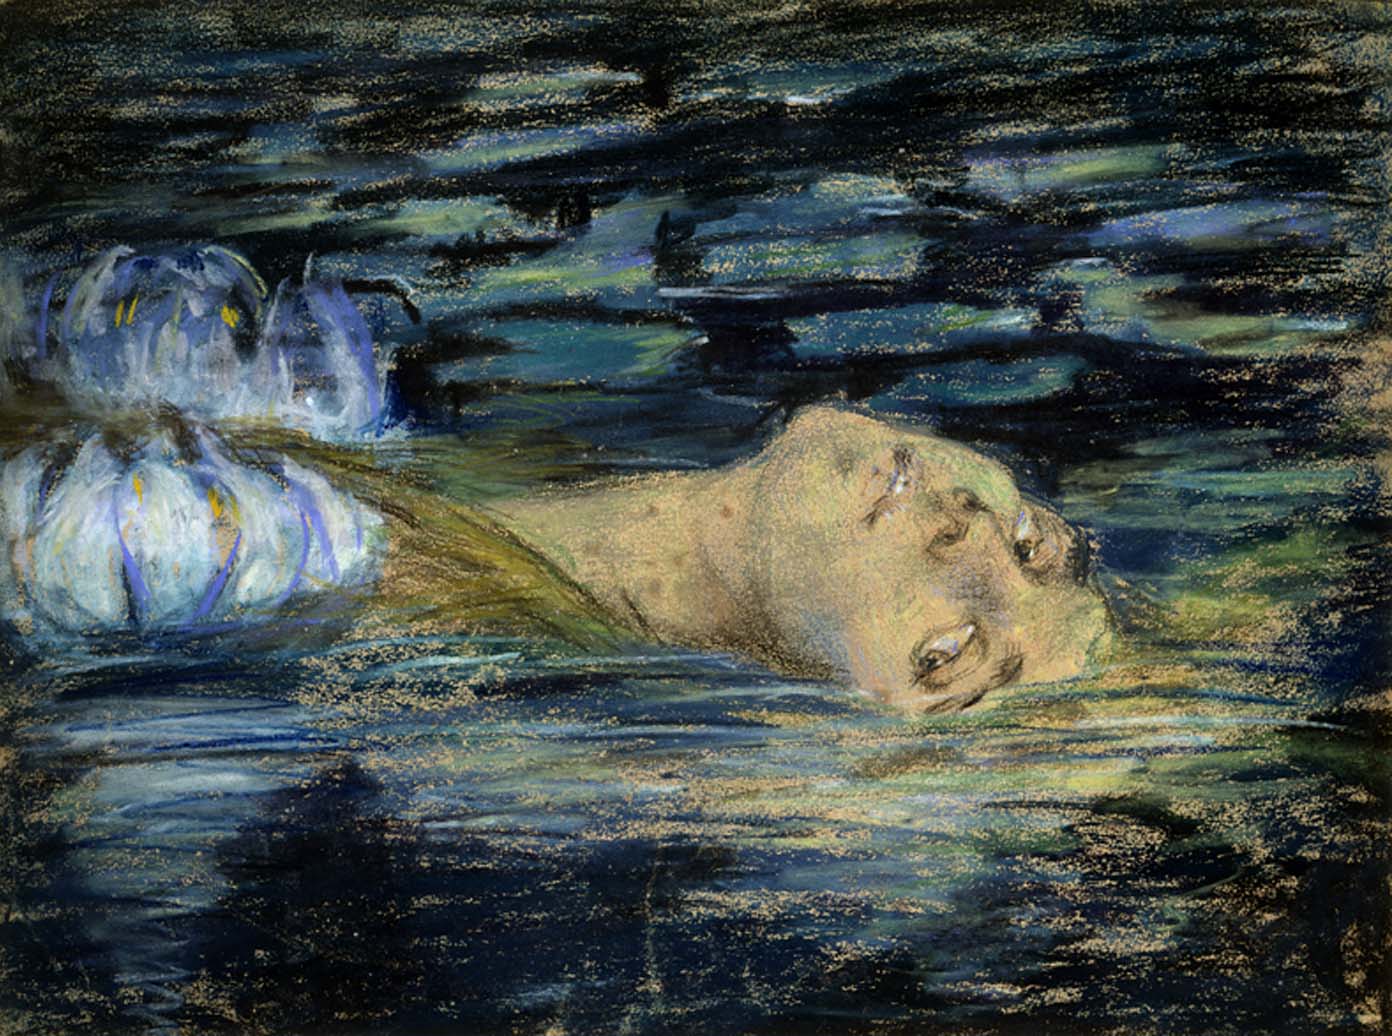 A woman gazes at the viewer while she floats on her back in water.